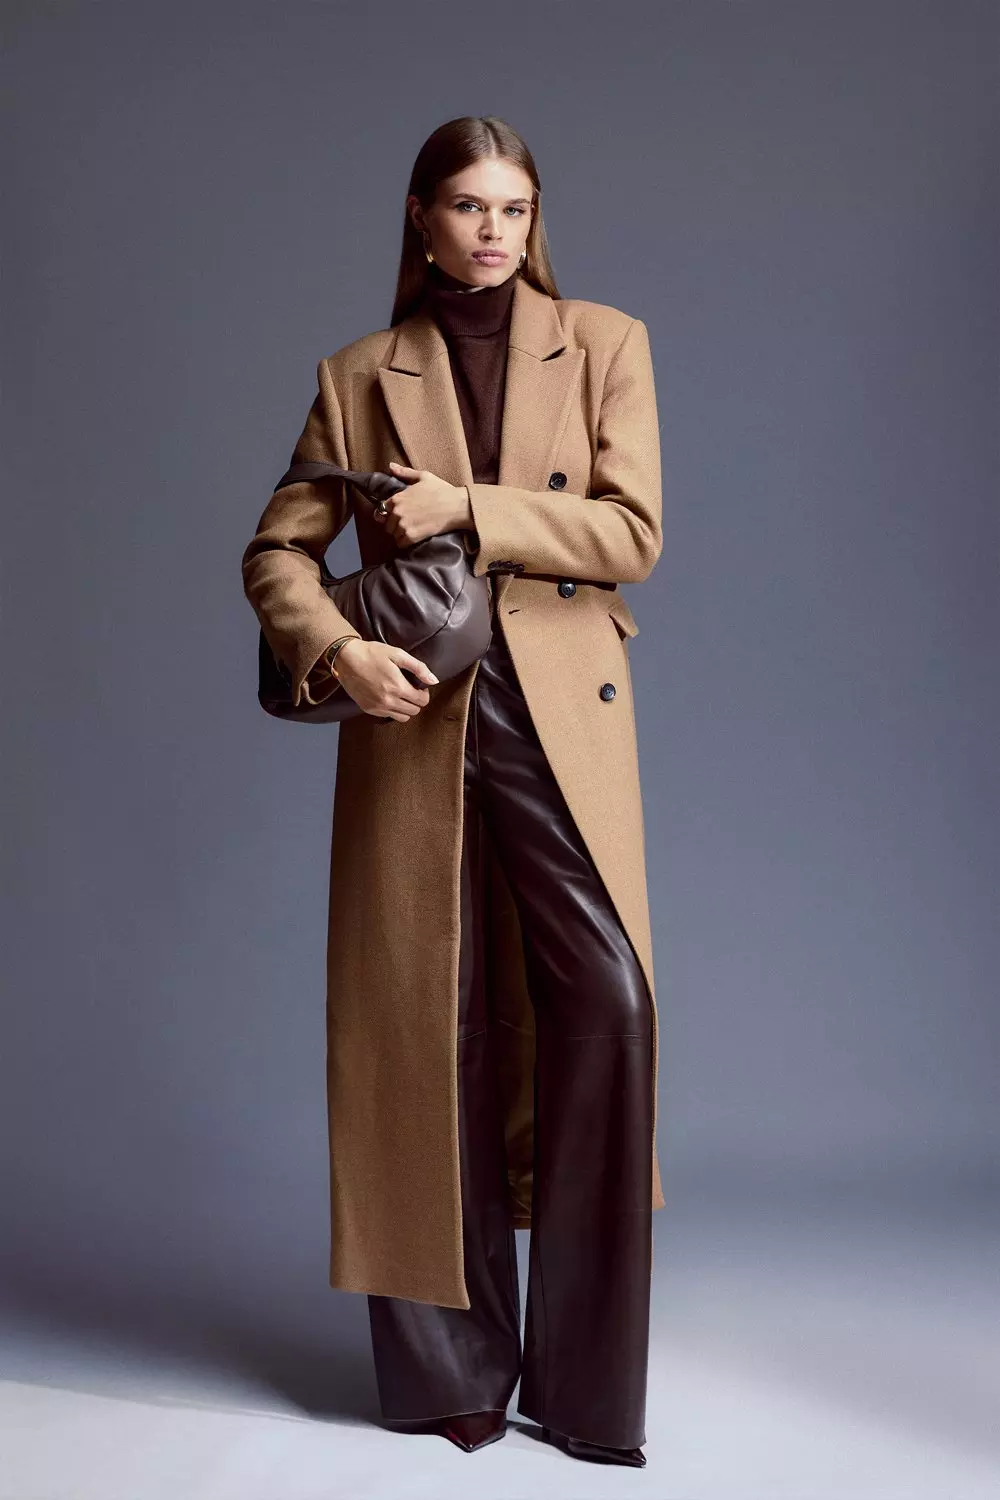 Women's Double Breasted Tailored Coat